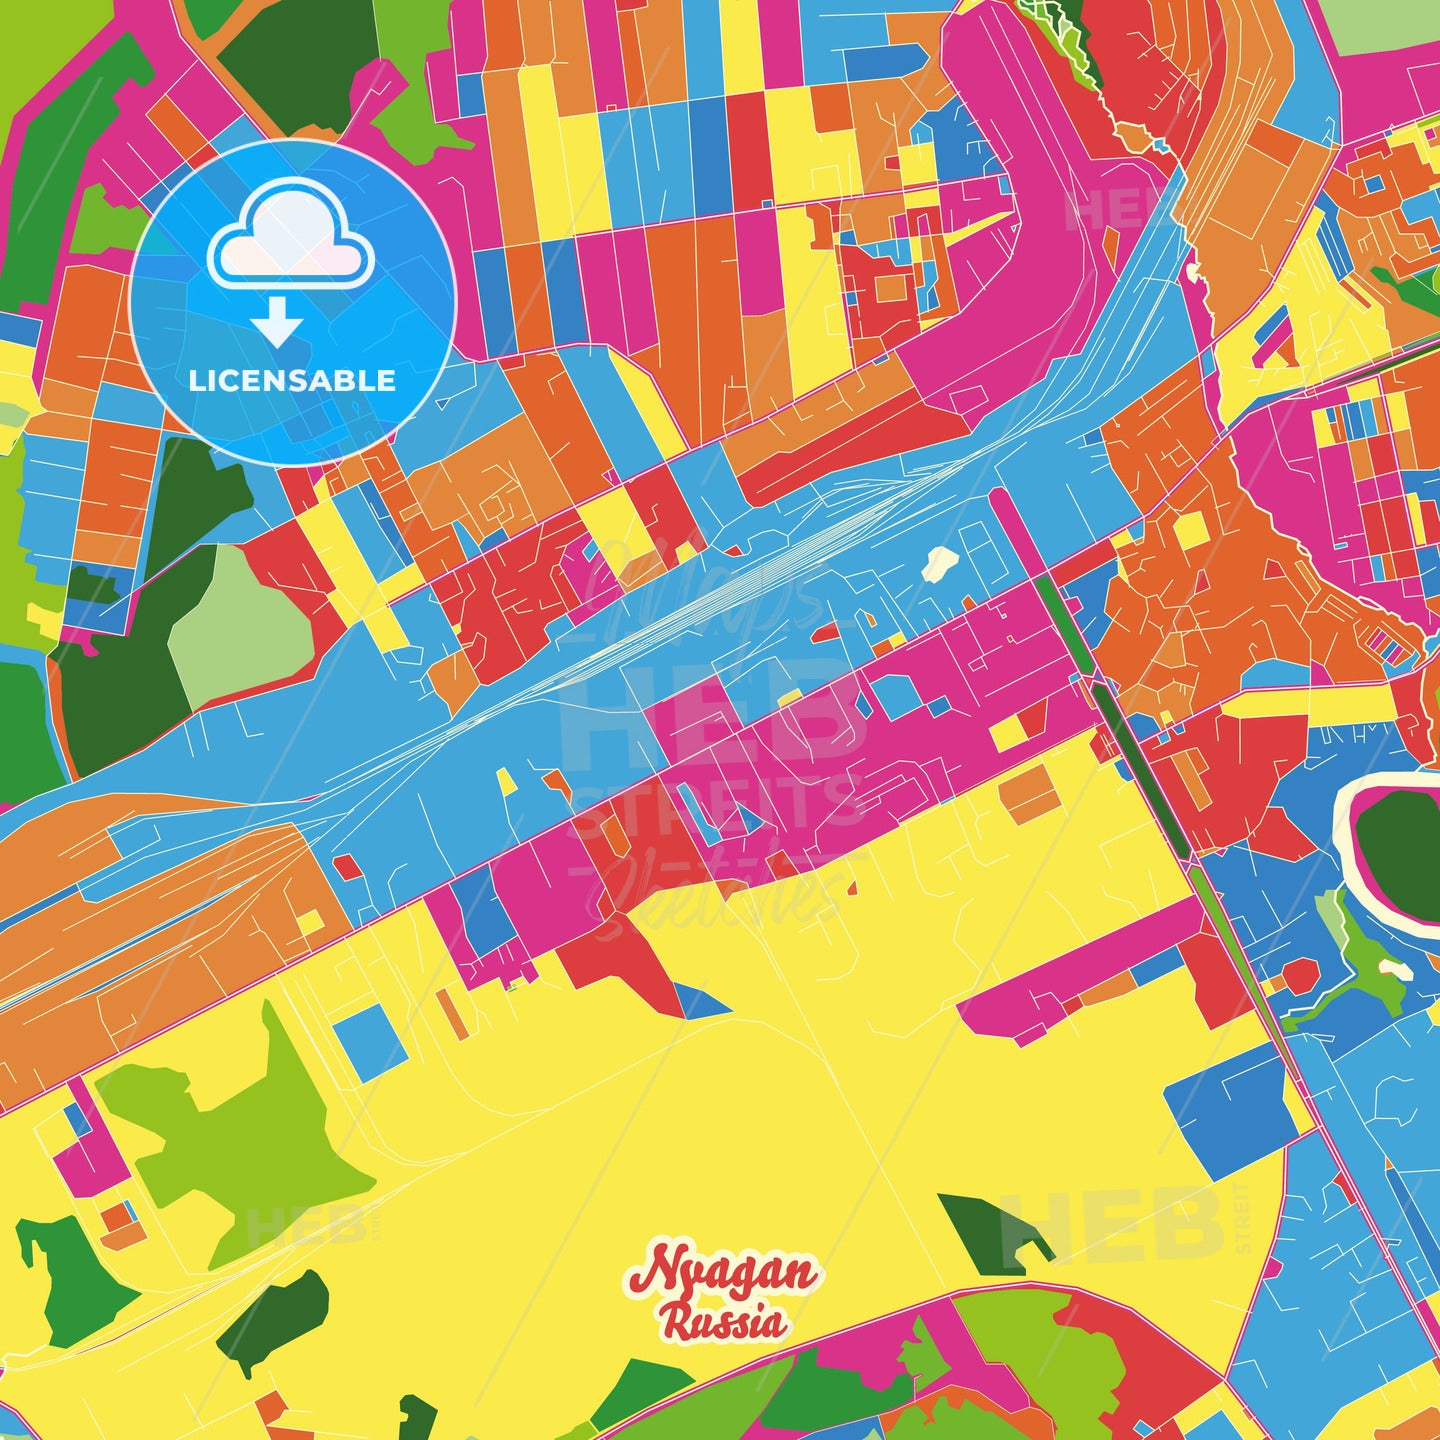 Nyagan, Russia Crazy Colorful Street Map Poster Template - HEBSTREITS Sketches